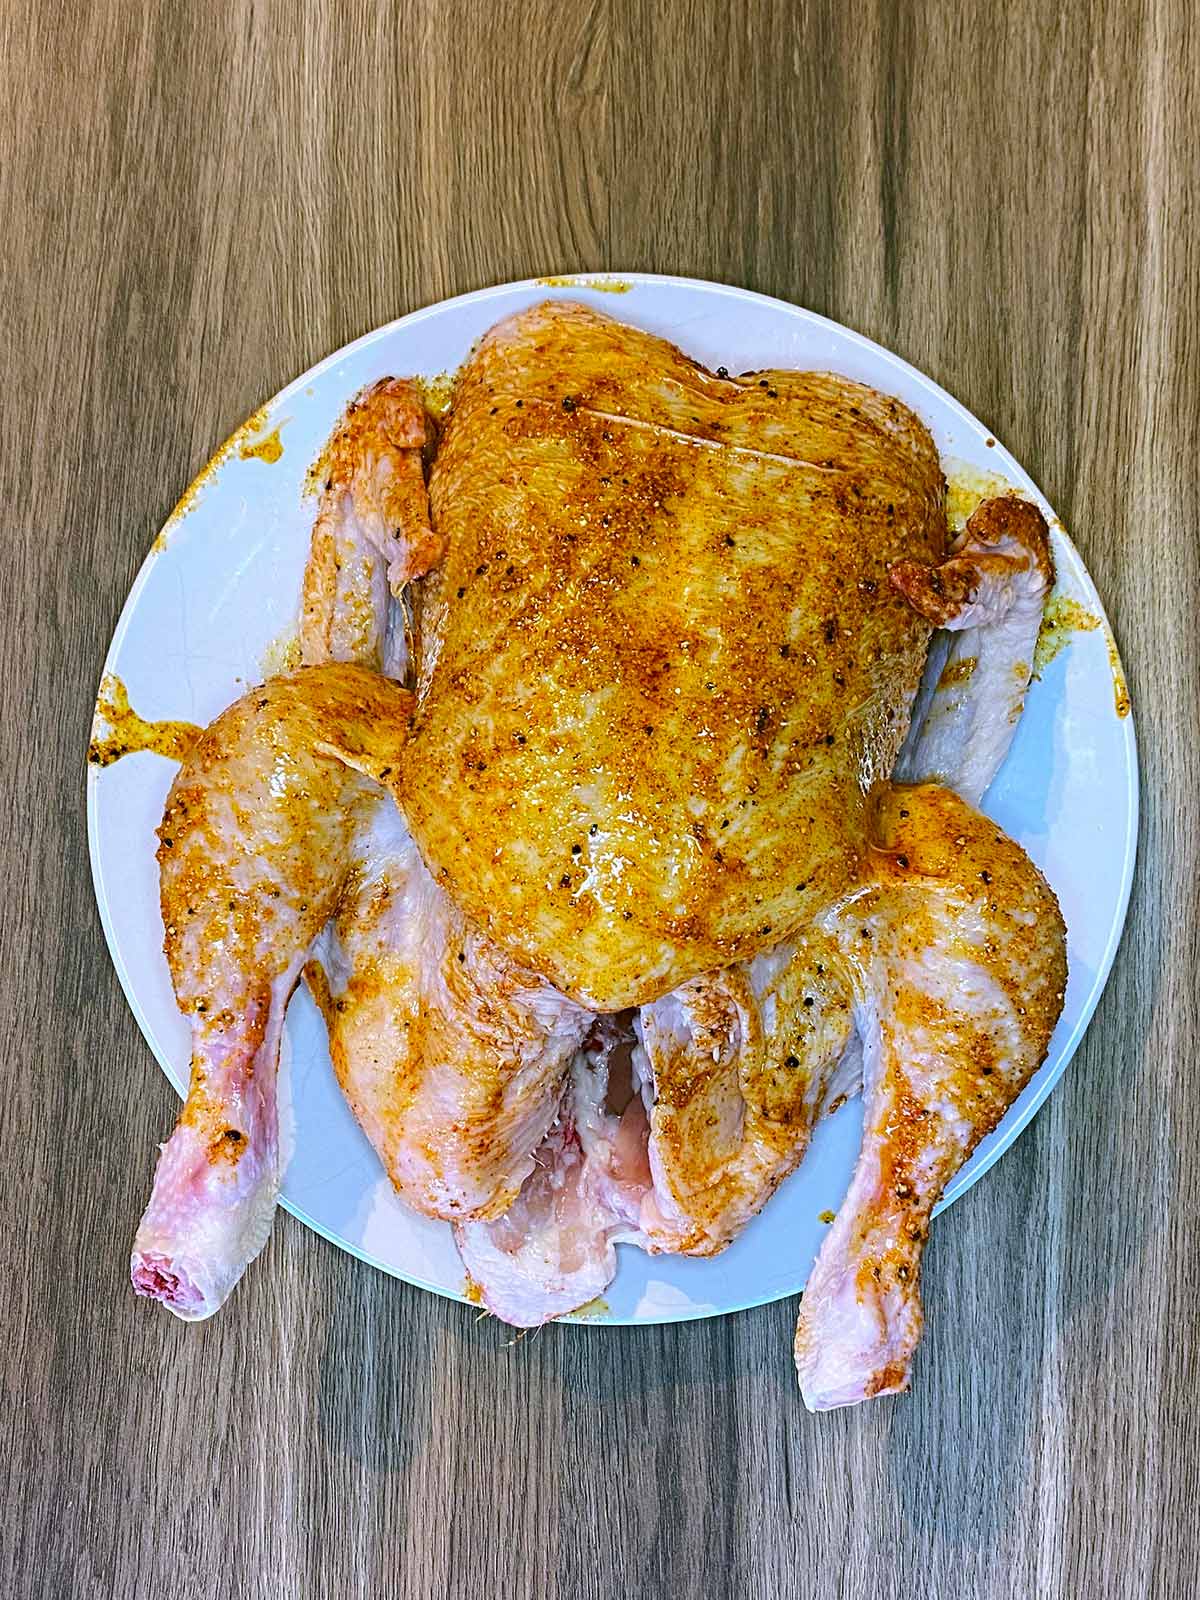 A whole raw chicken smothered in oil, garlic and paprika.